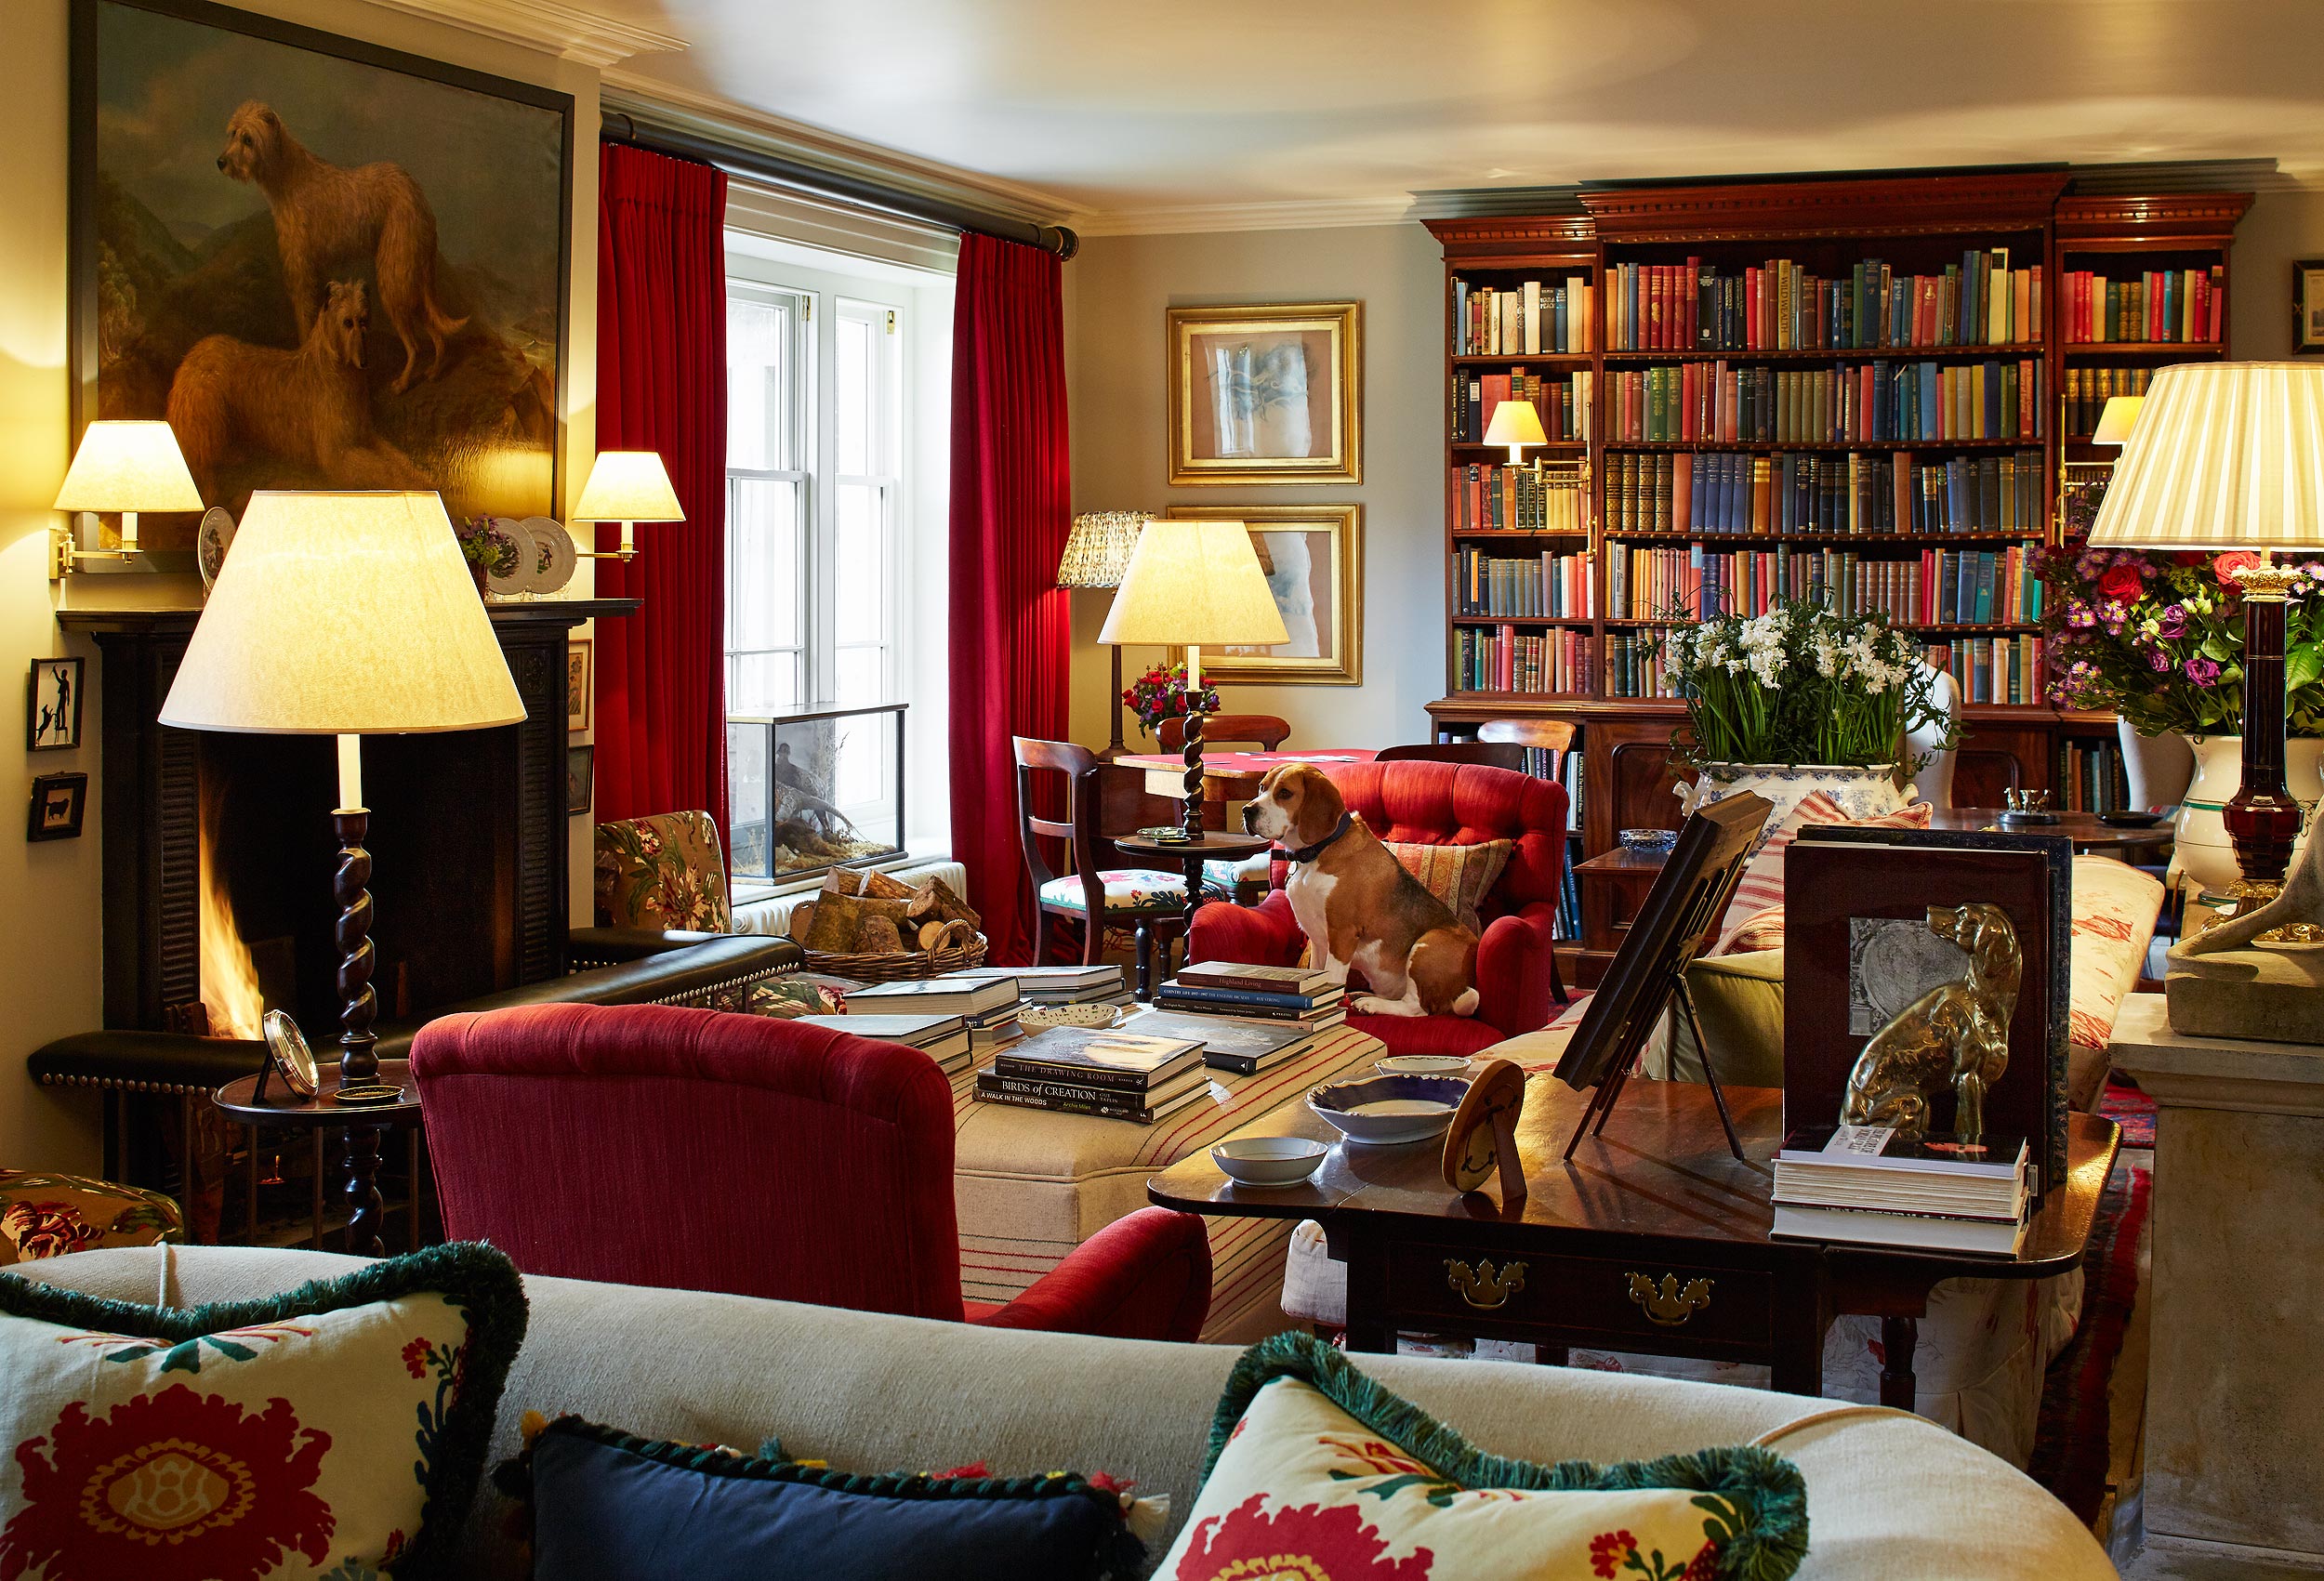 Drawing Room at Hound Lodge, Goodwood, Sussex, UK.  Estate photography by Mike Caldwell